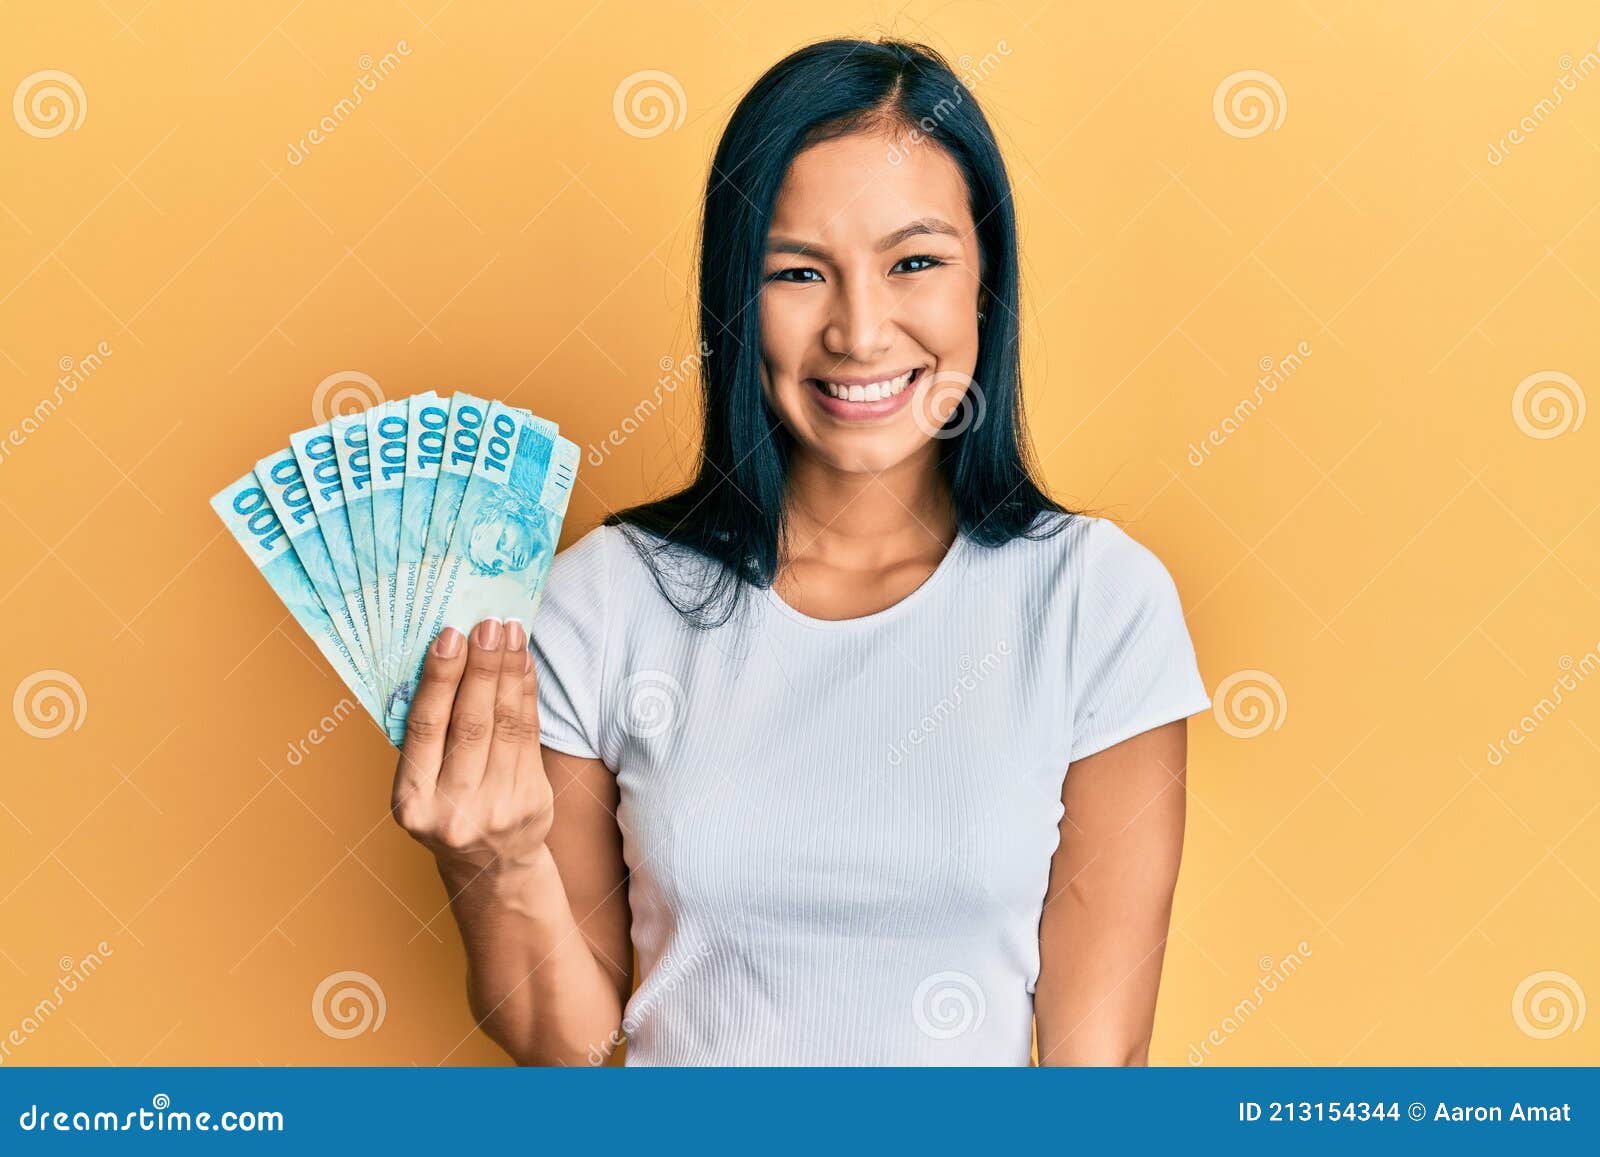 beautiful hispanic woman holding 100 brazilian real banknotes looking positive and happy standing and smiling with a confident